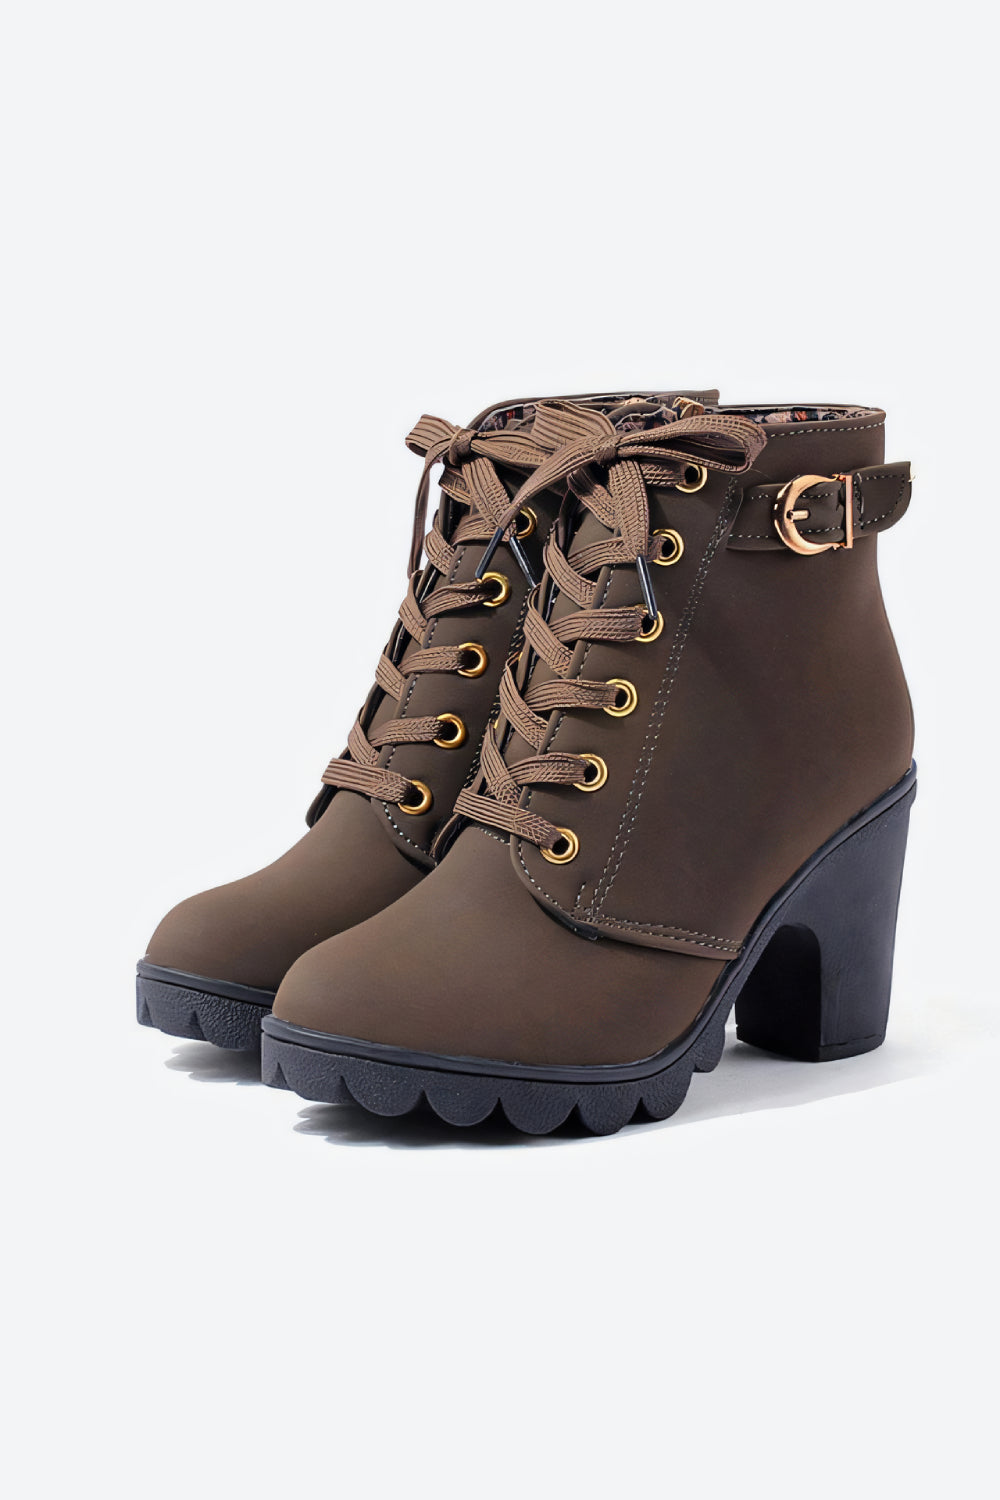 Strap It Martin Booties - Army Green - Strange Clothes